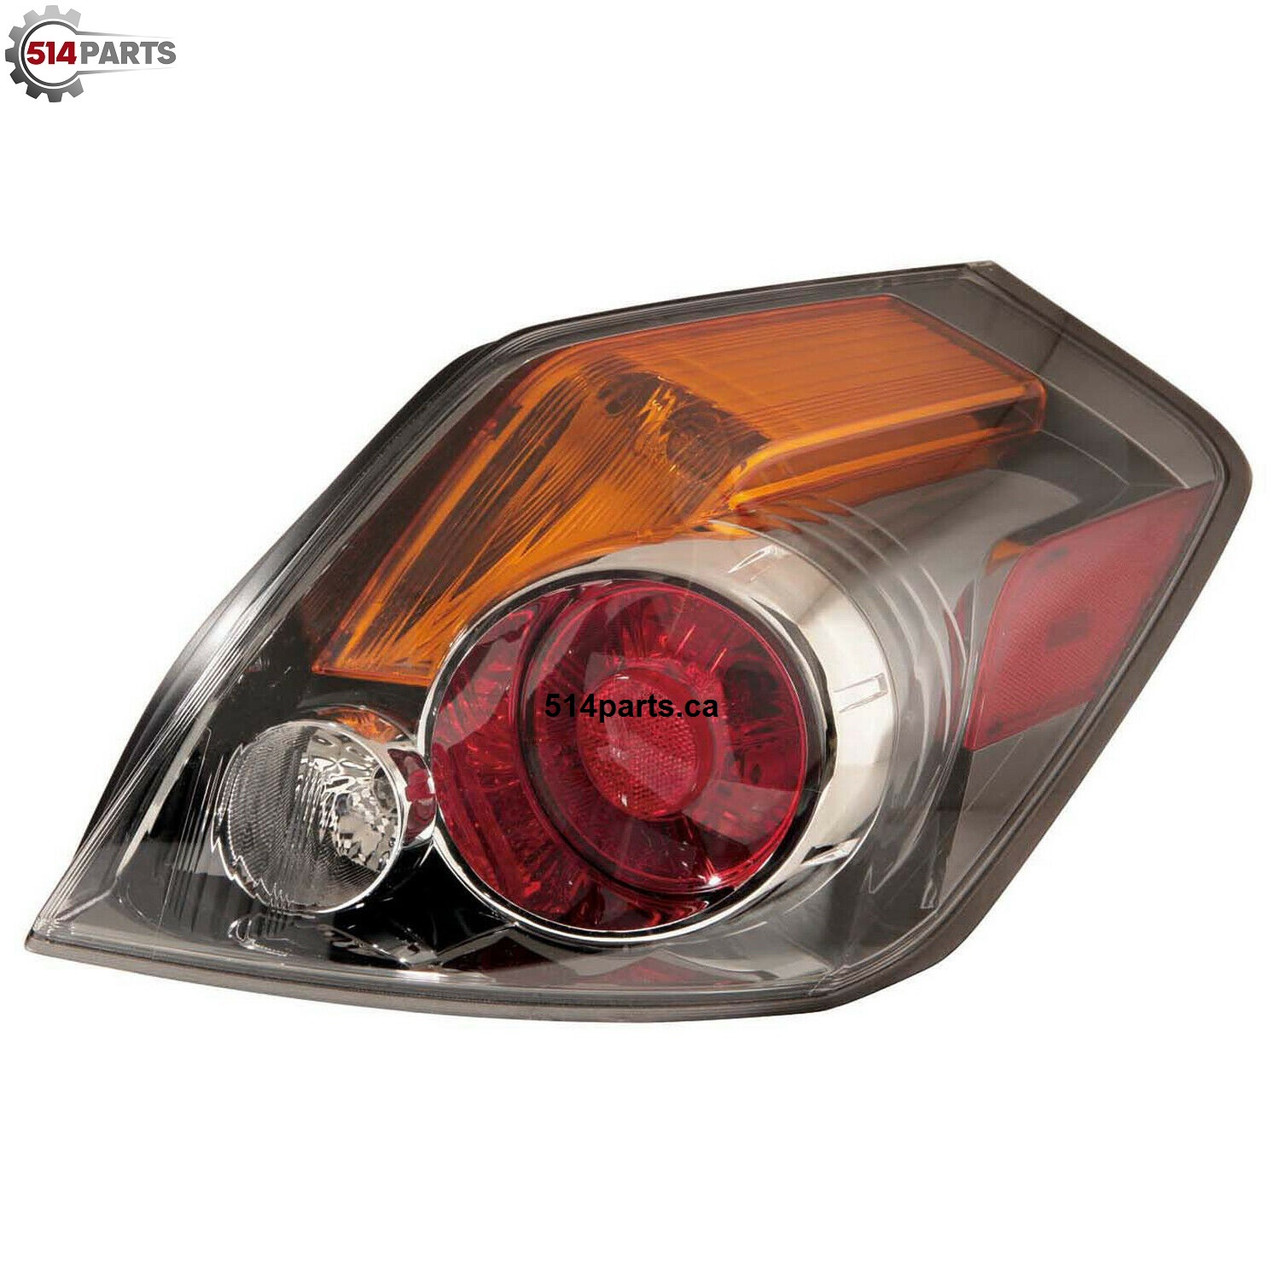 2010 - 2012 NISSAN ALTIMA and ALTIMA HYBRID TAIL LIGHTS High Quality - PHARES ARRIERE Haute Qualite